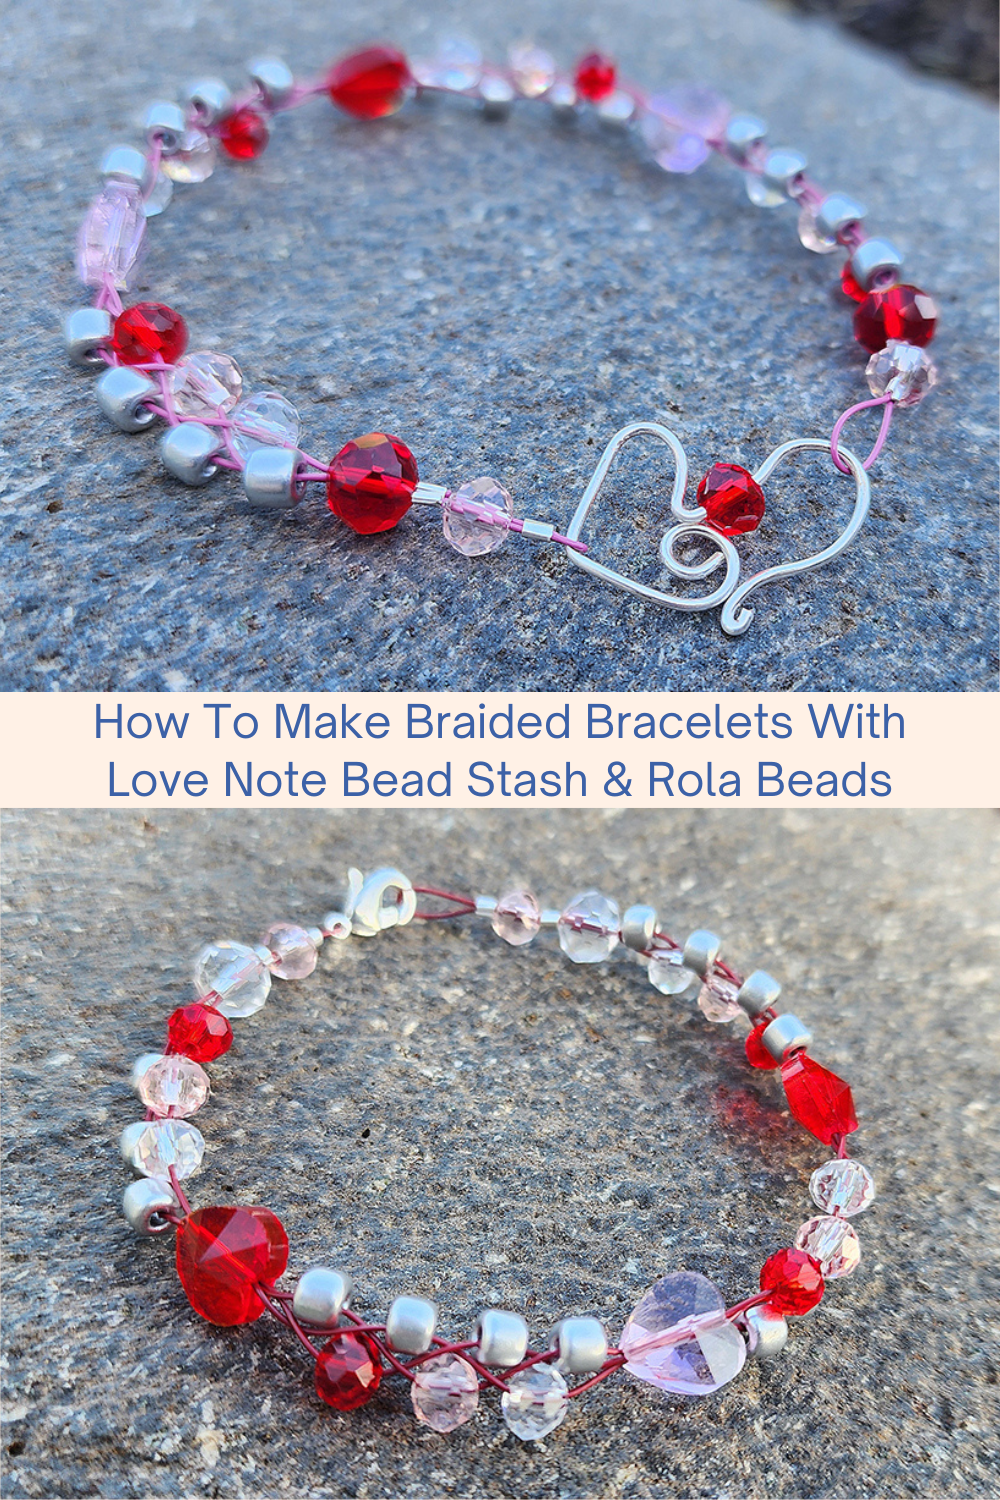 How To Make Braided Bracelets With Love Note Bead Stash & Rola Beads Collage